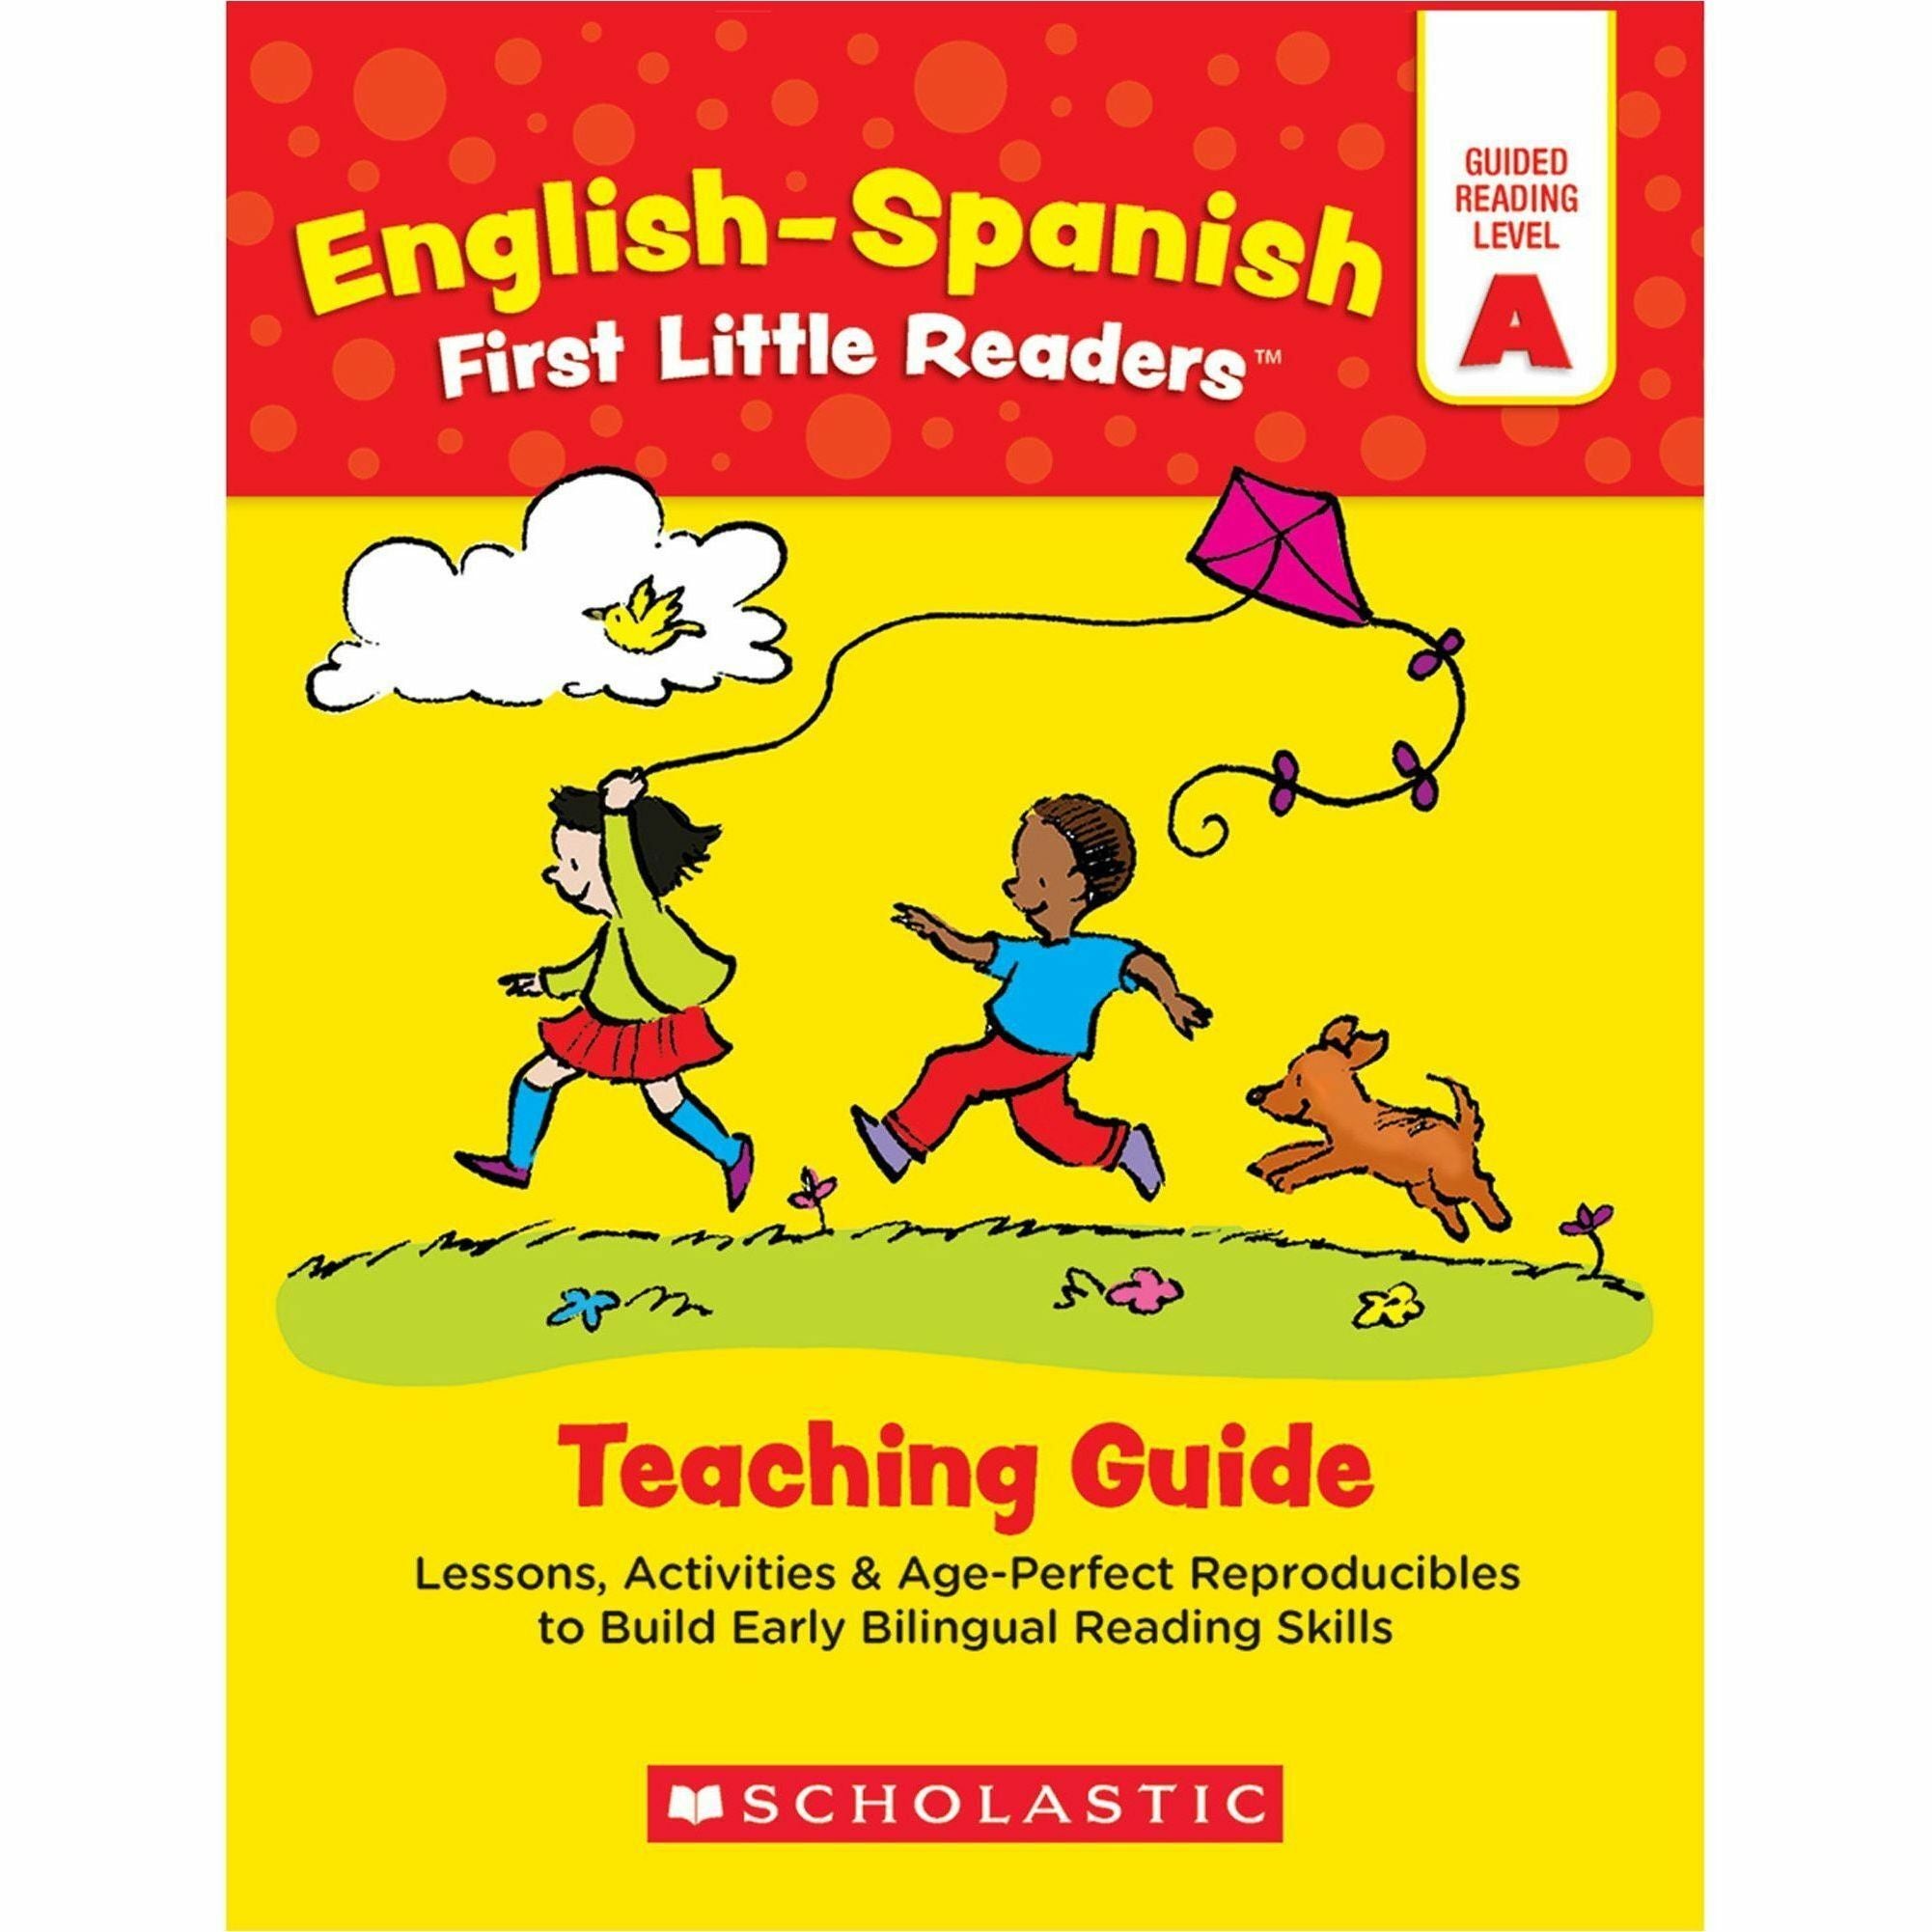 scholastic-first-little-readers-book-set-printed-book-by-deborah-schecter-8-pages-scholastic-teaching-resources-publication-june-1-2020-book-grade-preschool-2-english-spanish_shs133866803x - 2